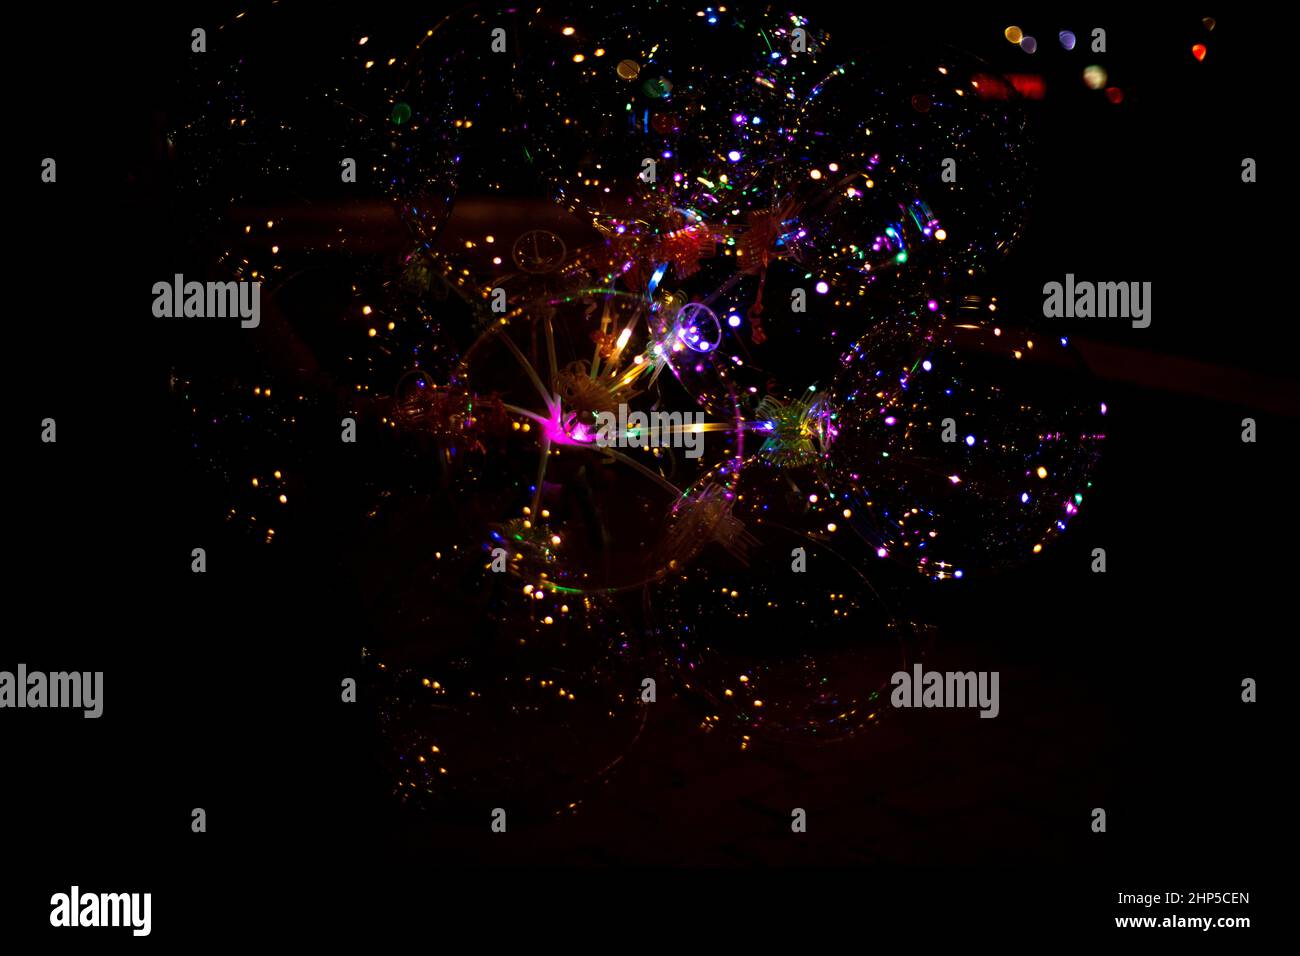 Salute in the sky. Explosion of fireworks in the night sky. Firecrackers flapping sparks in a dark space. Festive fireworks. Background with sparks fr Stock Photo